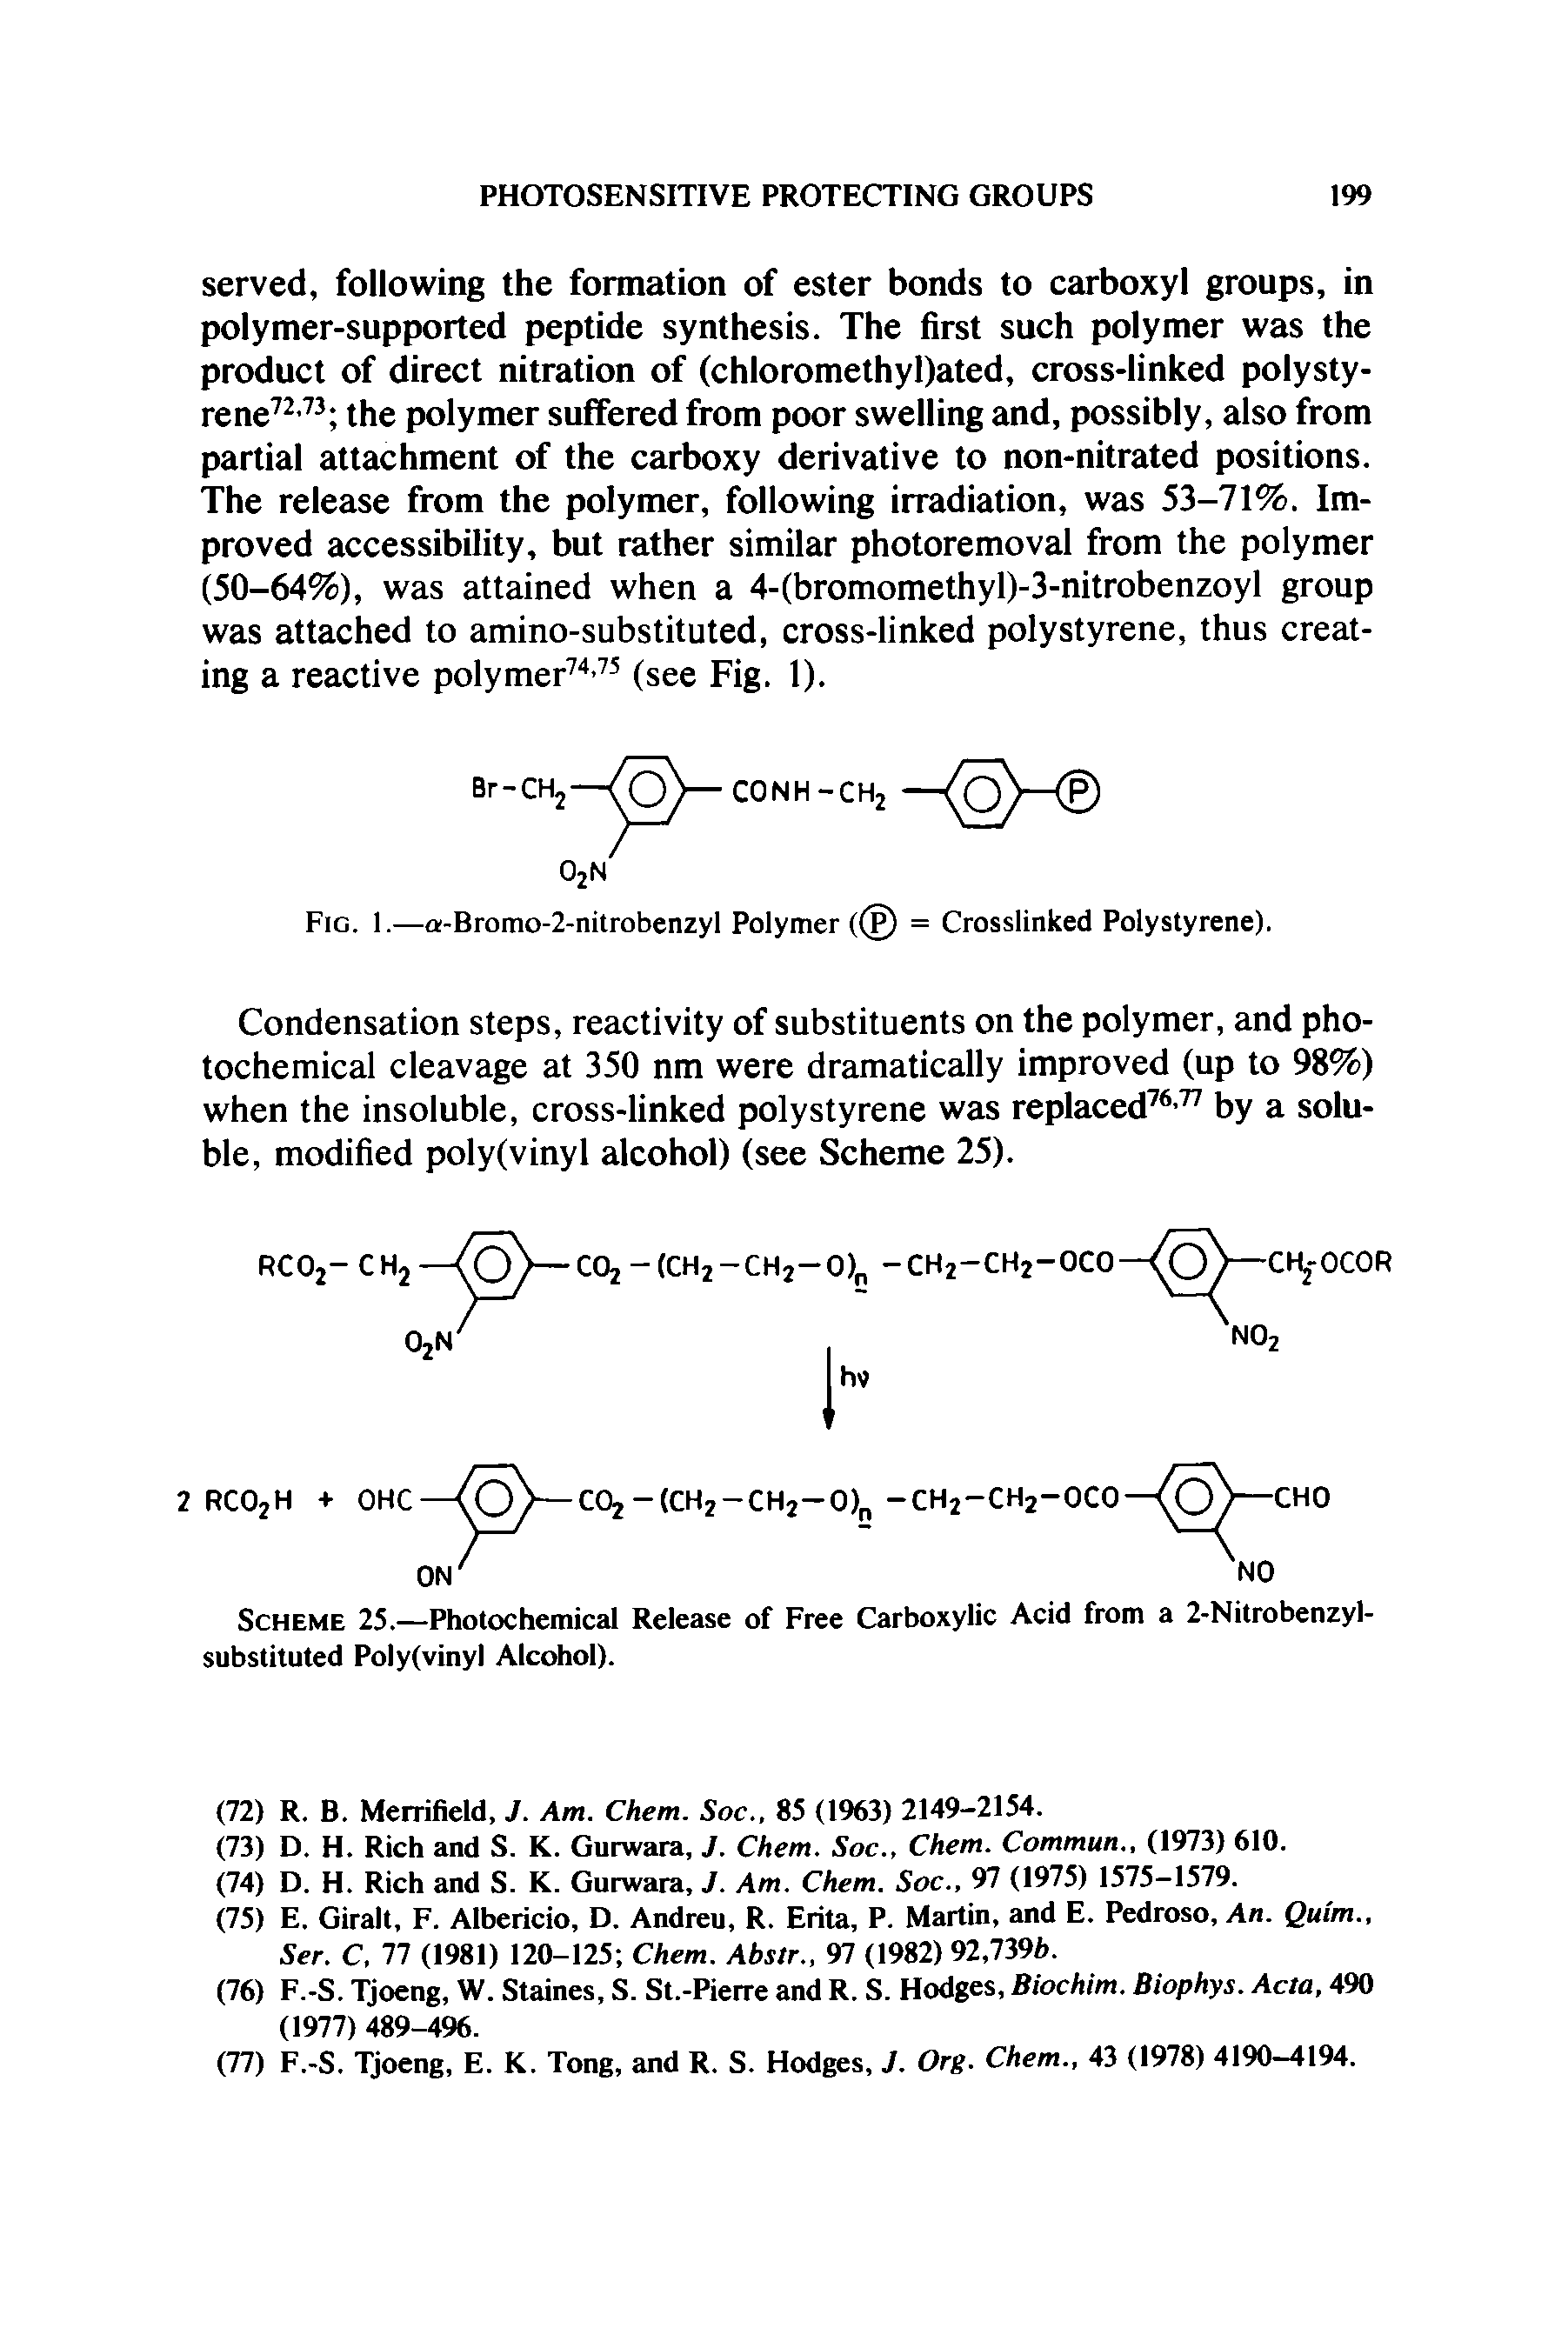 Scheme 25.—Photochemical Release of Free Carboxylic Acid from a 2-Nitrobenzyl-substituted Poly(vinyl Alcohol).